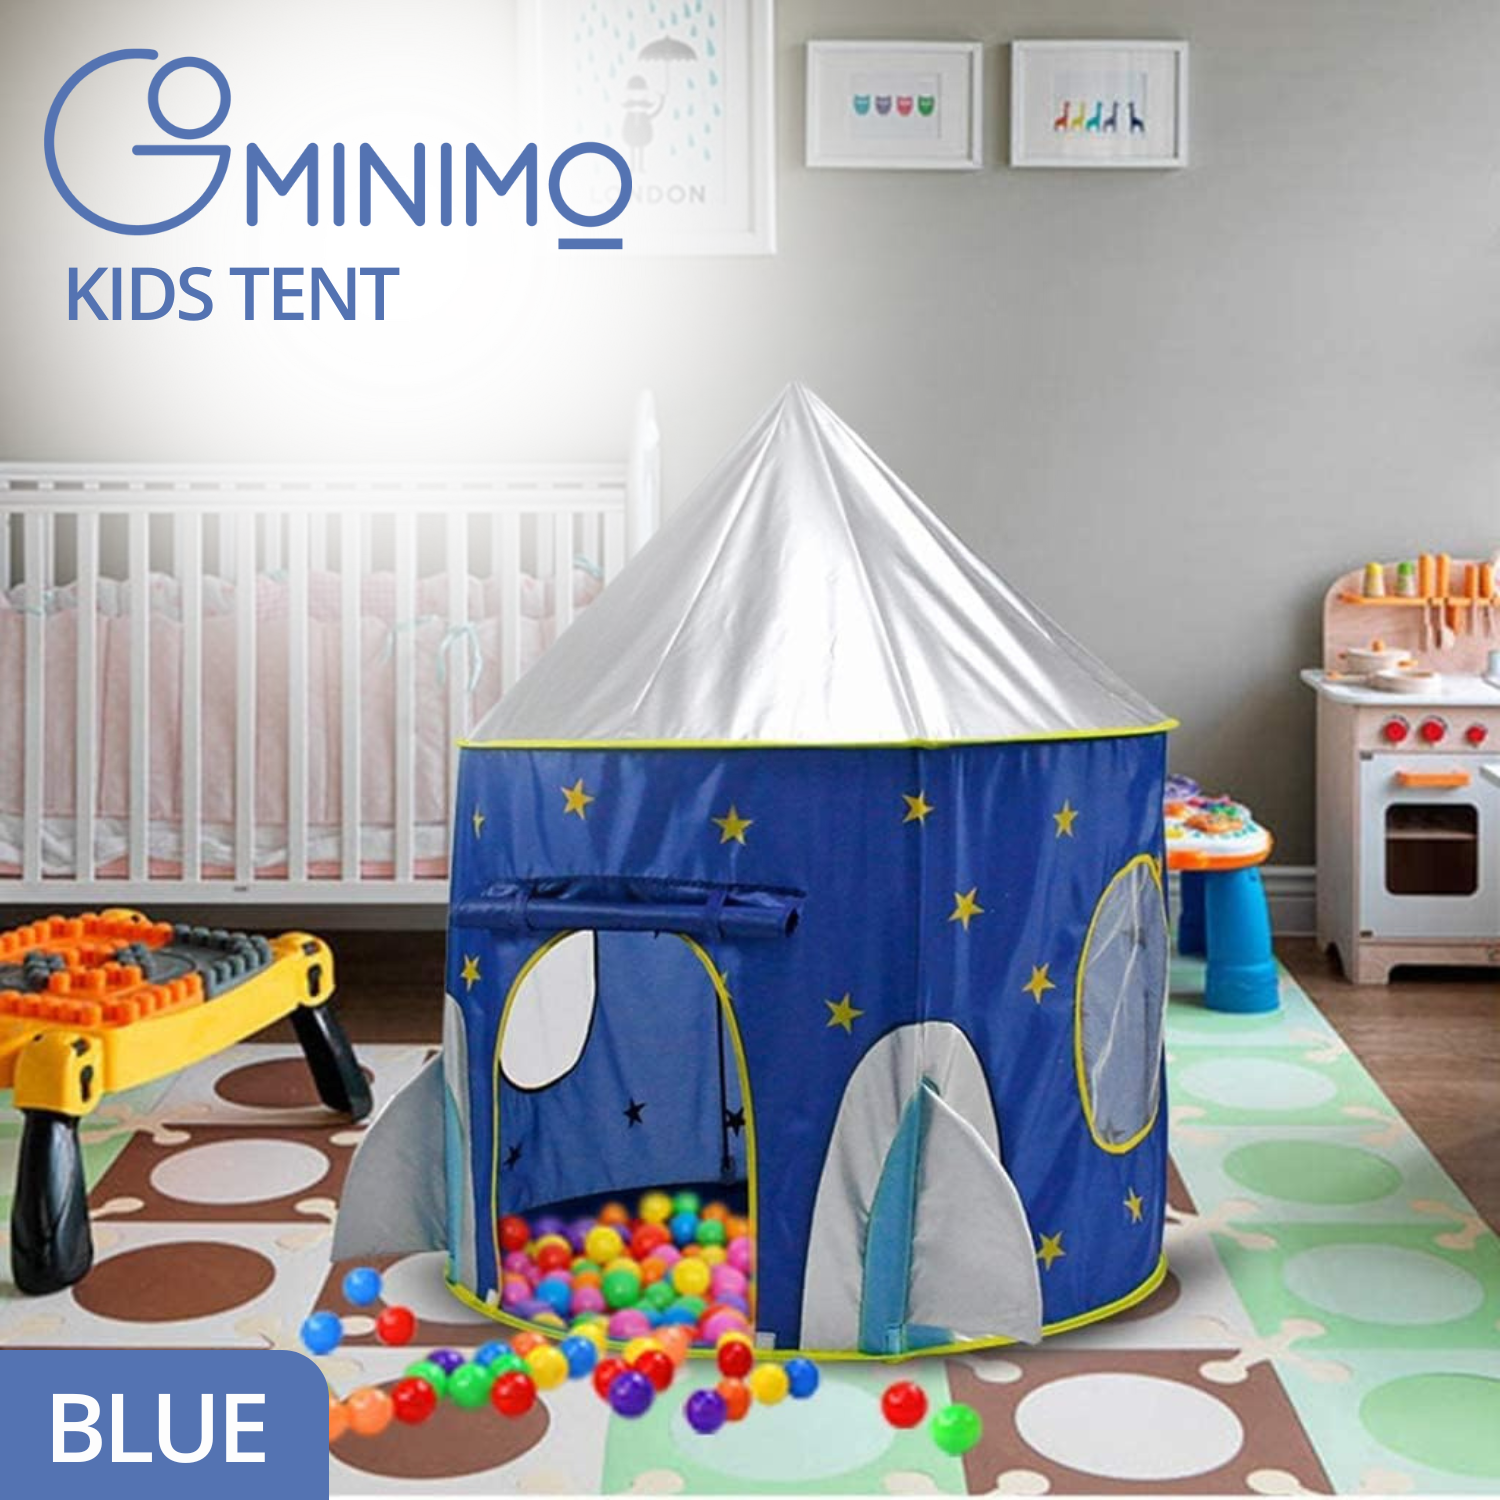 GOMINIMO 3 in 1 Sky Style Kids Play Tent with Carrying Bag (Blue and Yellow) GO-KT-100-LK - SILBERSHELL